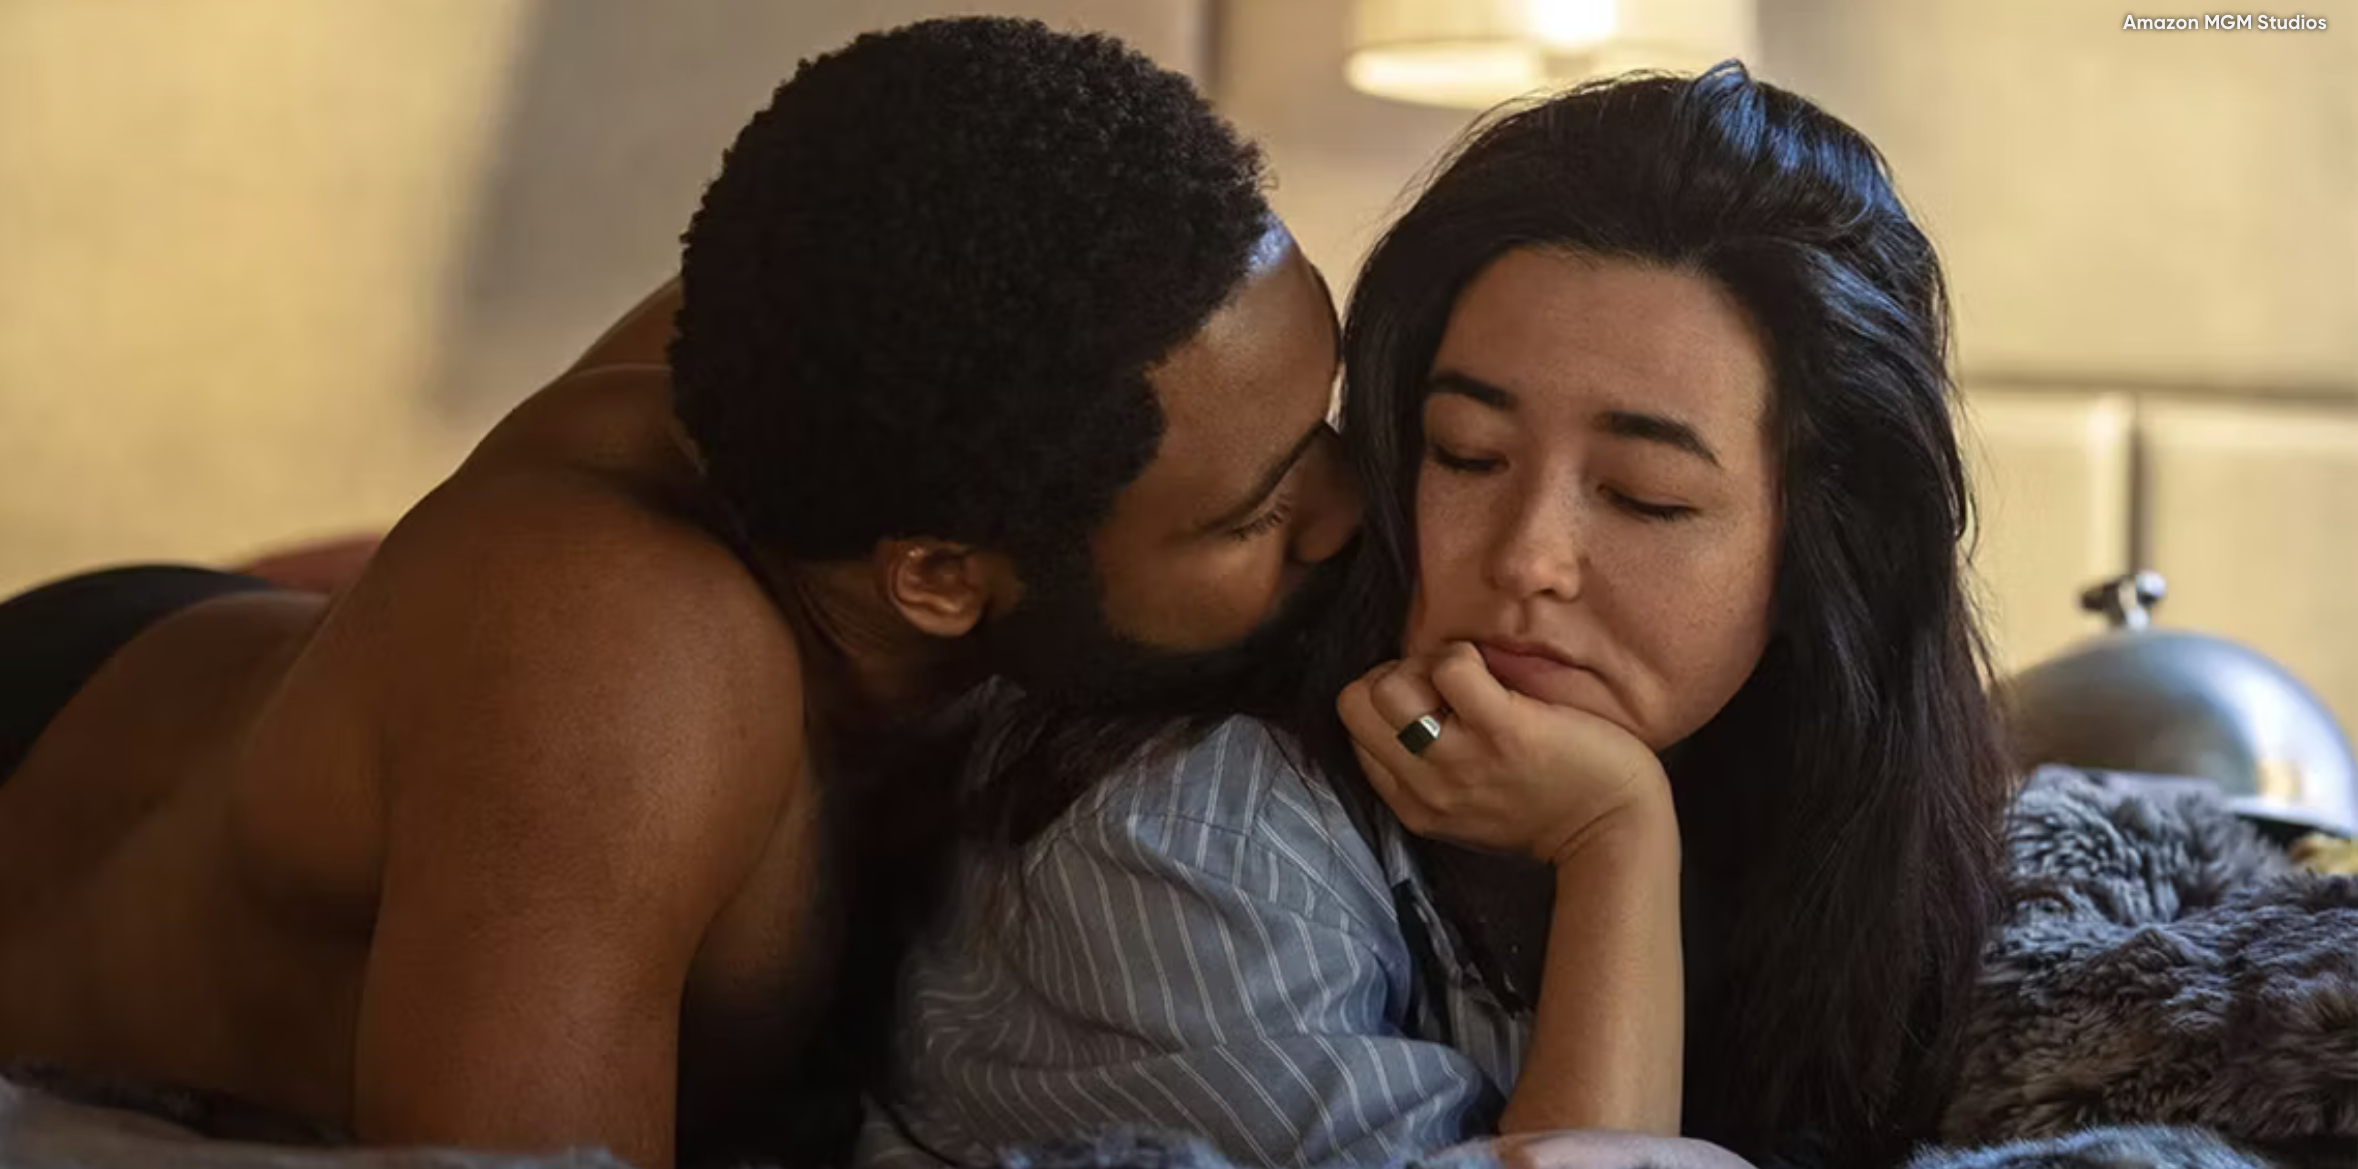 Mr. & Mrs. Smith - Donald Glover Reveals the Reason Why Phoebe Waller-Bridge Left the Series